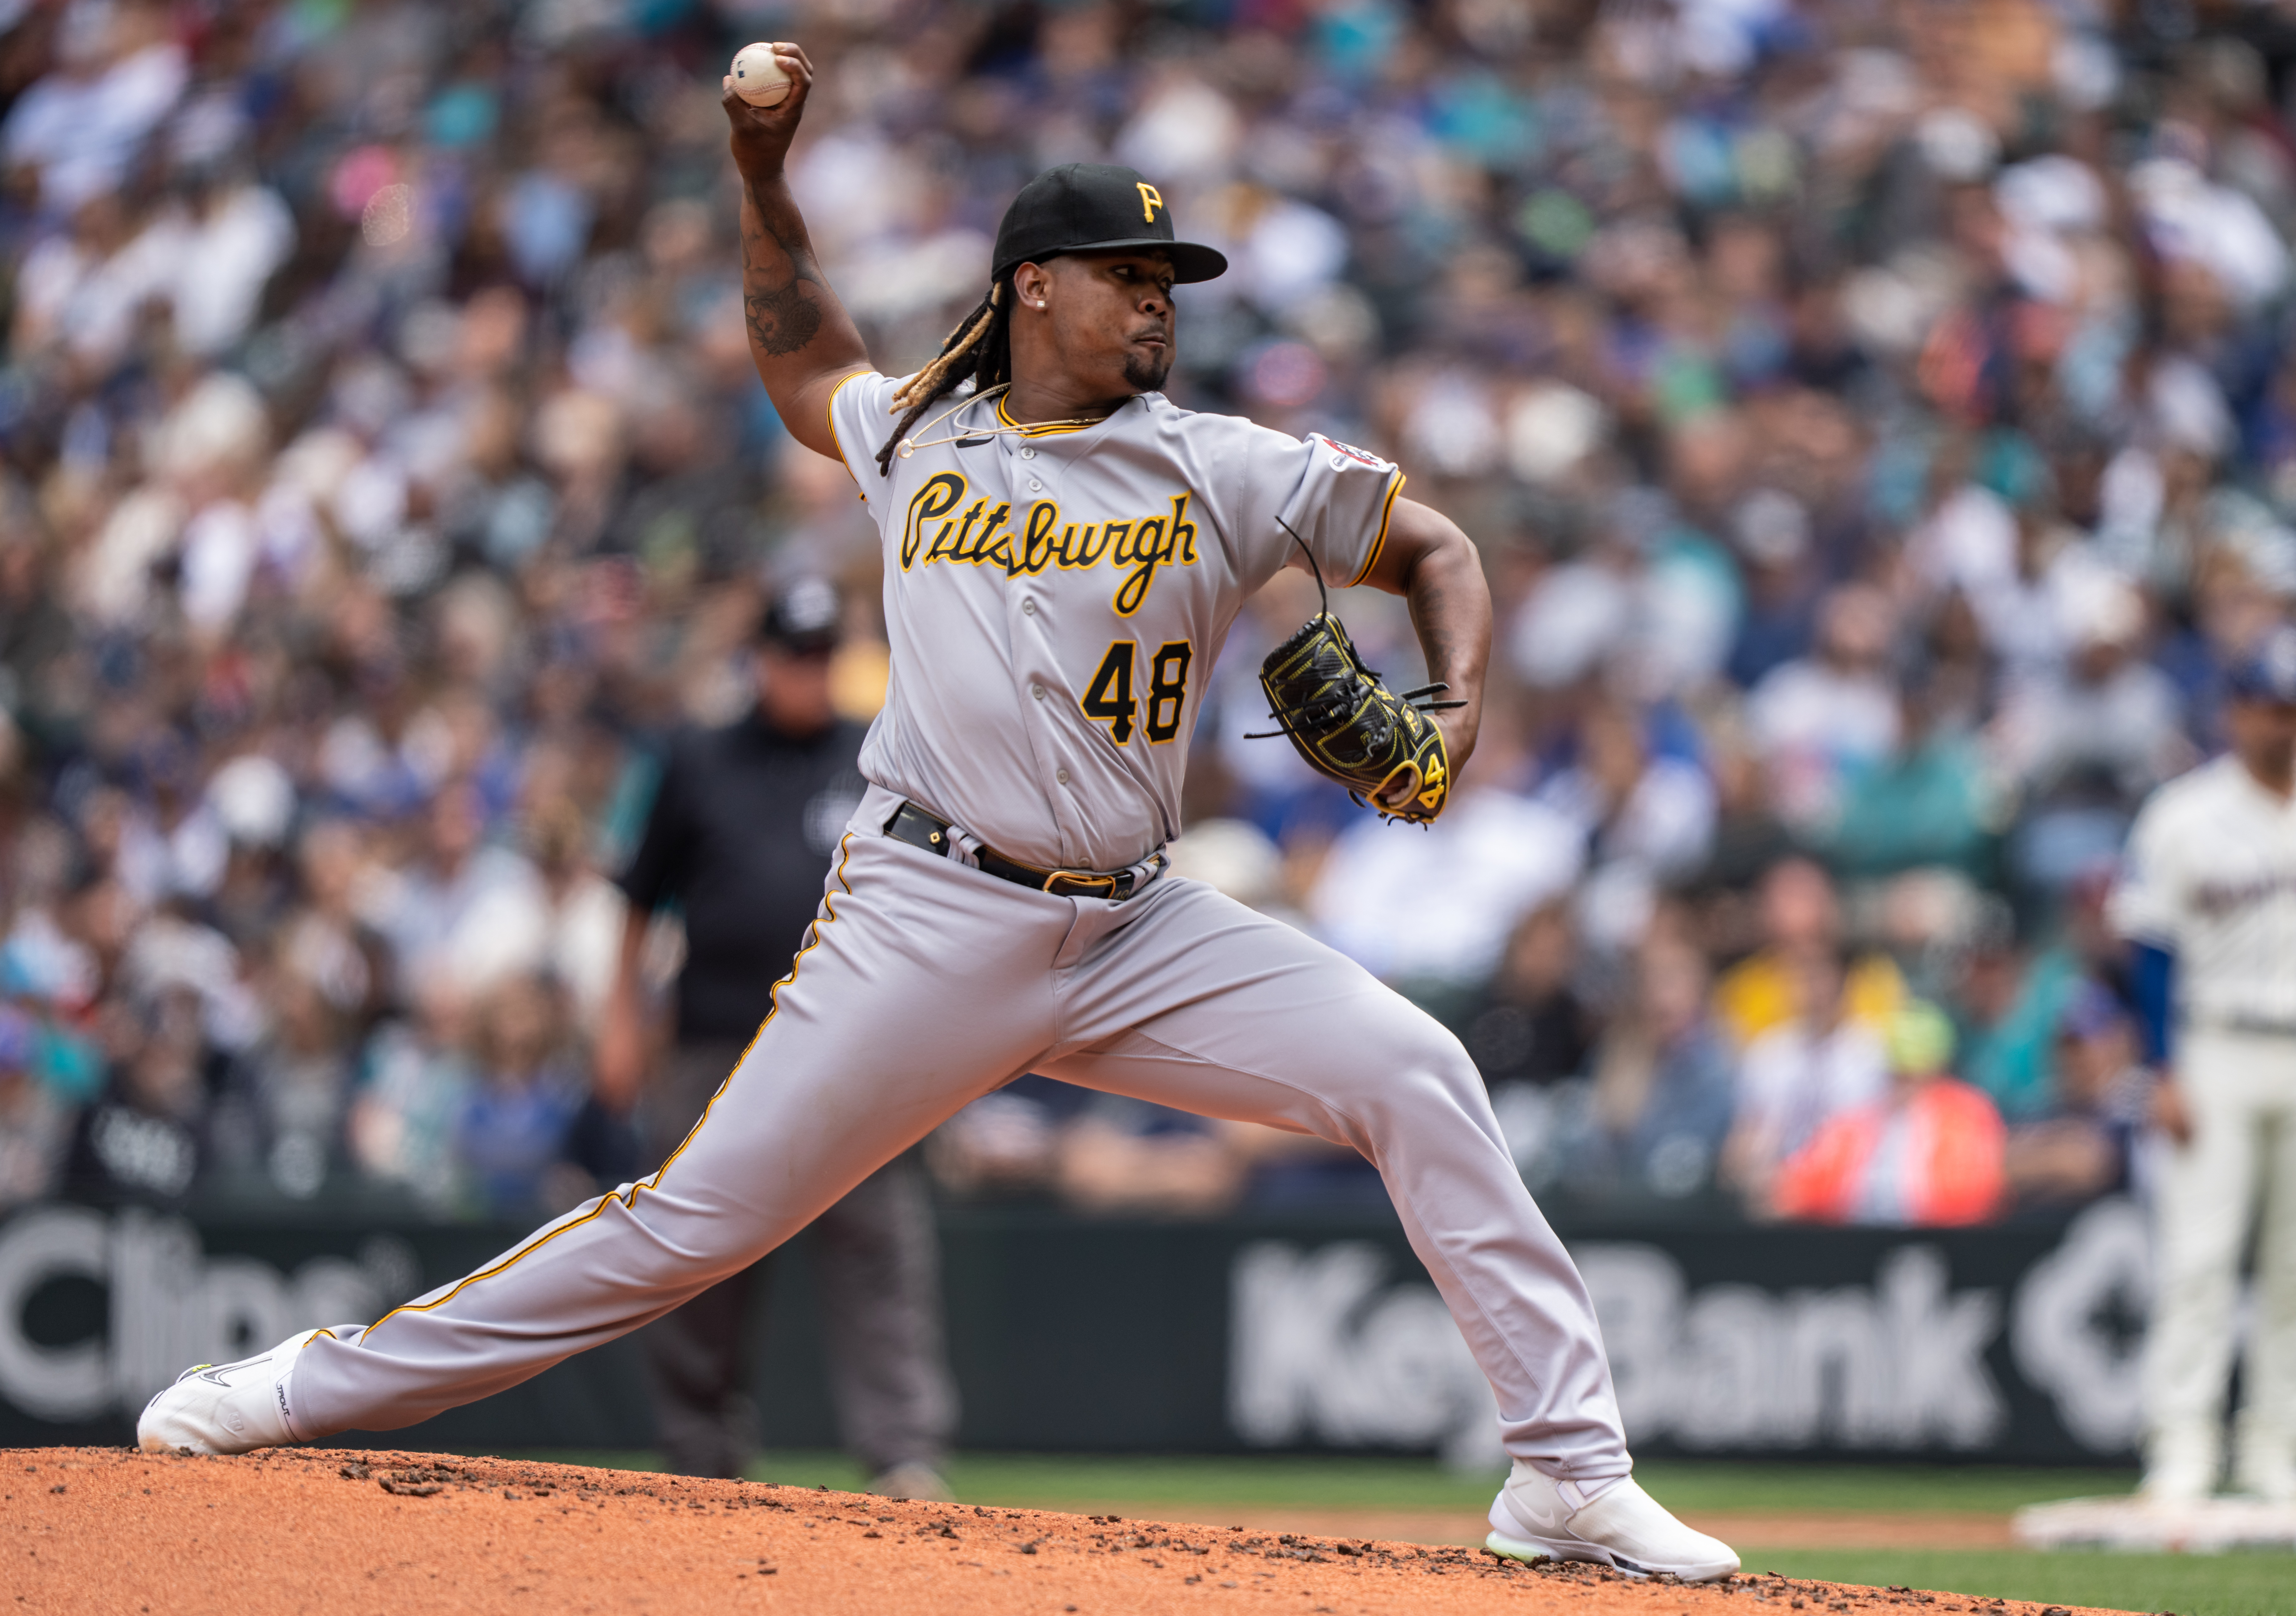 Starter Luis L. Ortiz #48 of the Pittsburgh Pirates pitches during the second inning of a game against the Seattle Mariners at T-Mobile Park on May 28, 2023 in Seattle, Washington.